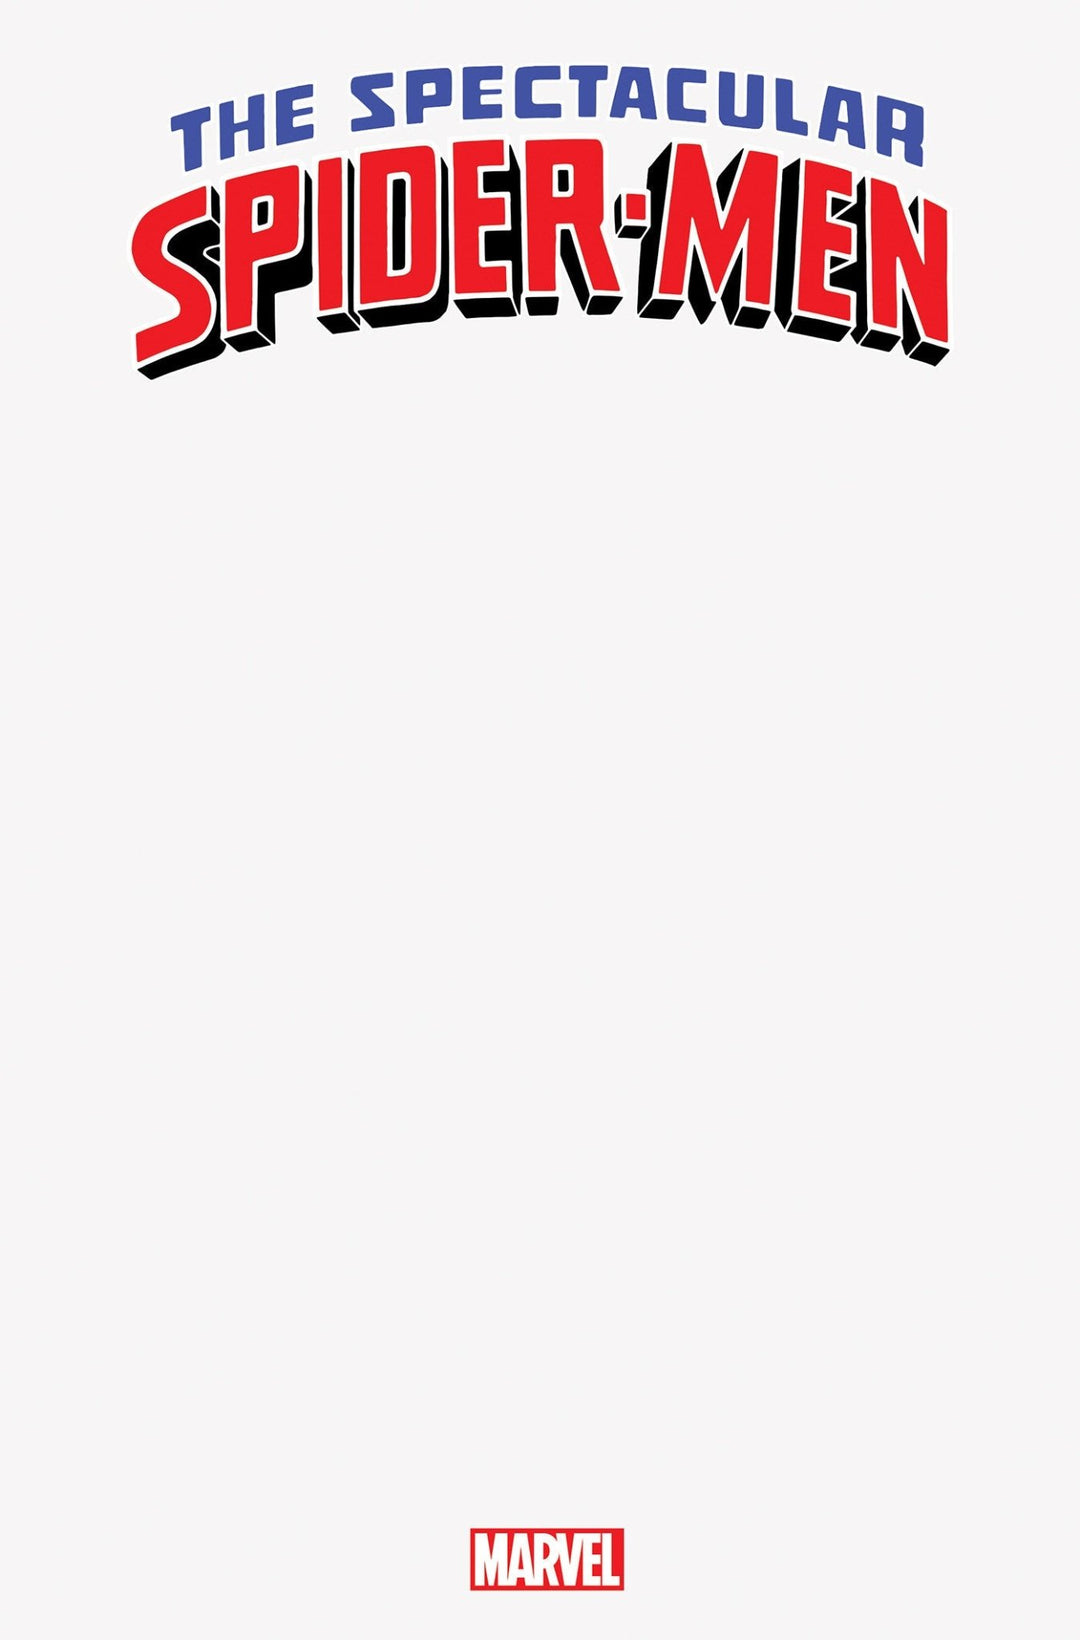 The Spectacular Spider-Men 1 Blank Cover Variant - gabescaveccc